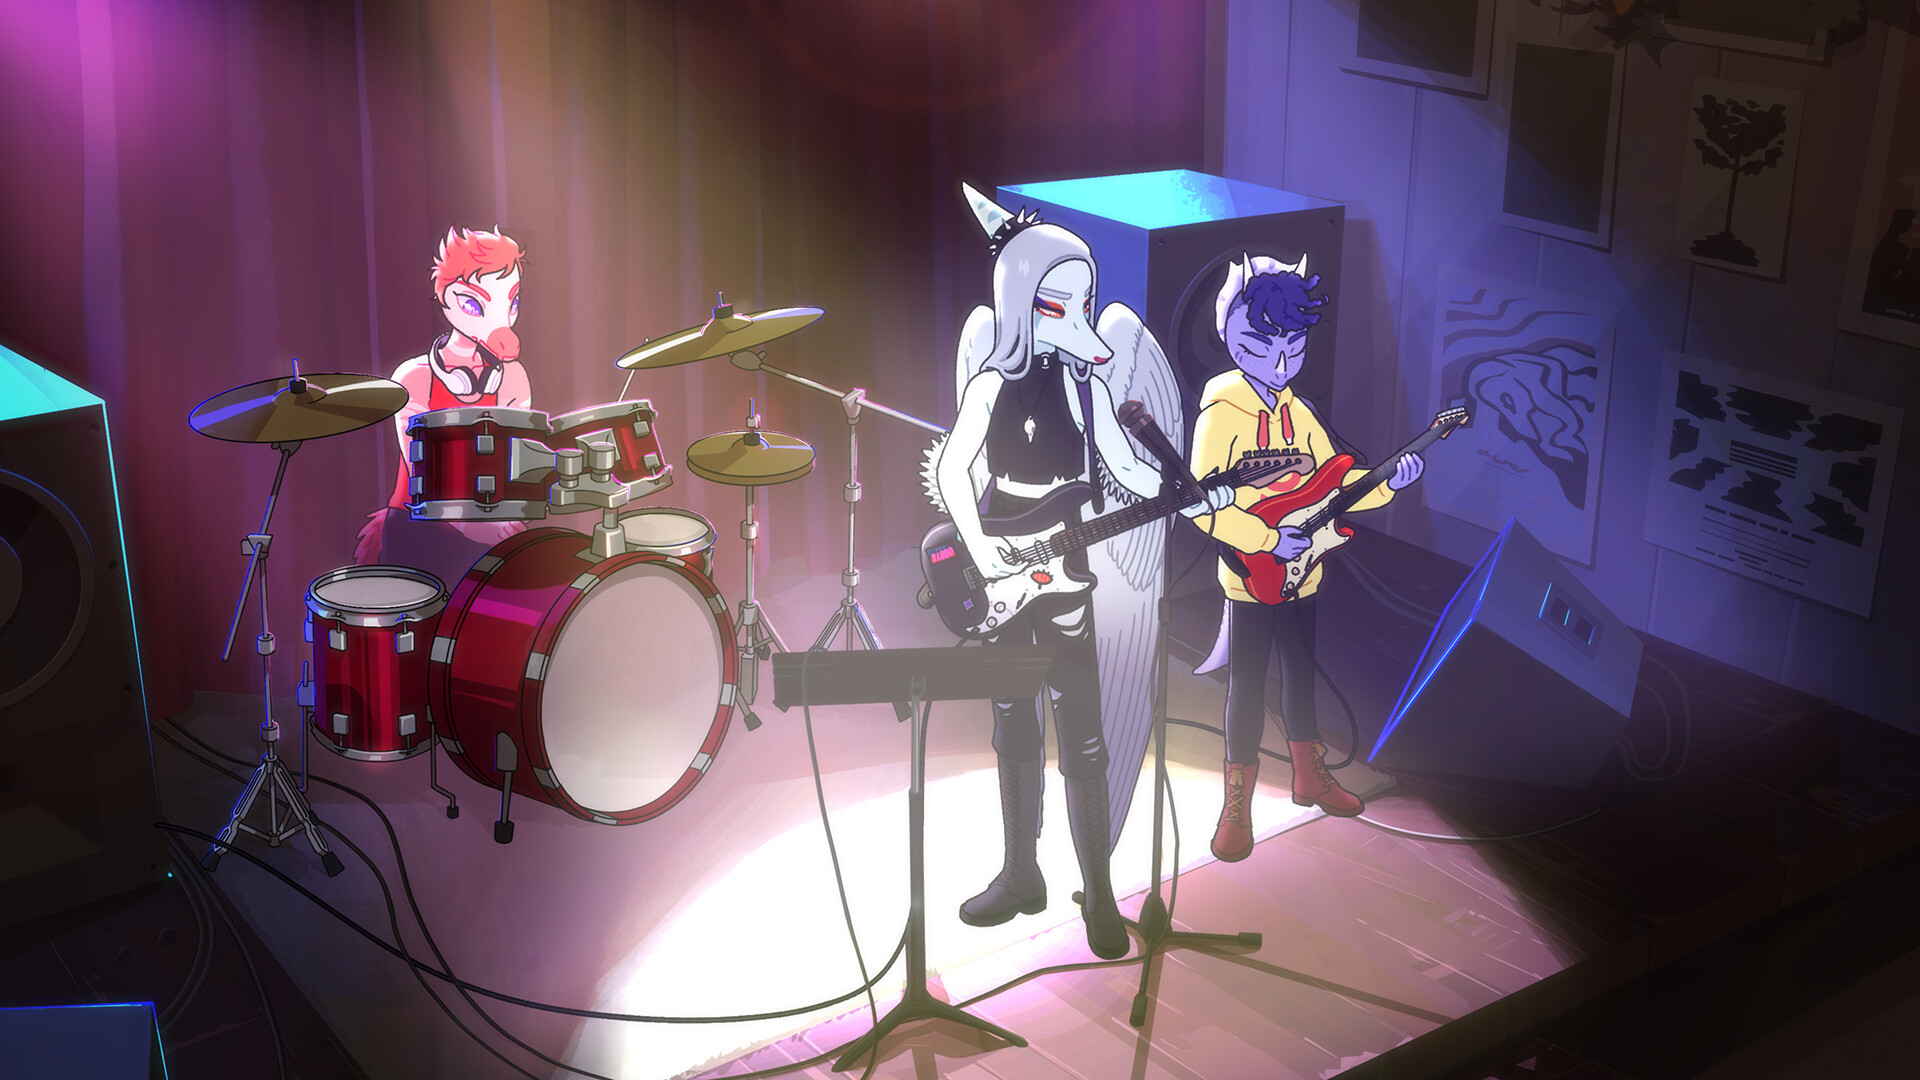 A screenshot from Goodbye Volcano High. Three dinosaurs are in a band onstage. The lead singer and guitarist is pale blue with wings and tattered black clothing. To the right is the bassist, a purple dino with a purple hat and yellow hoodie. At the back left is a pink dinosaur with red clothes playing the drums.